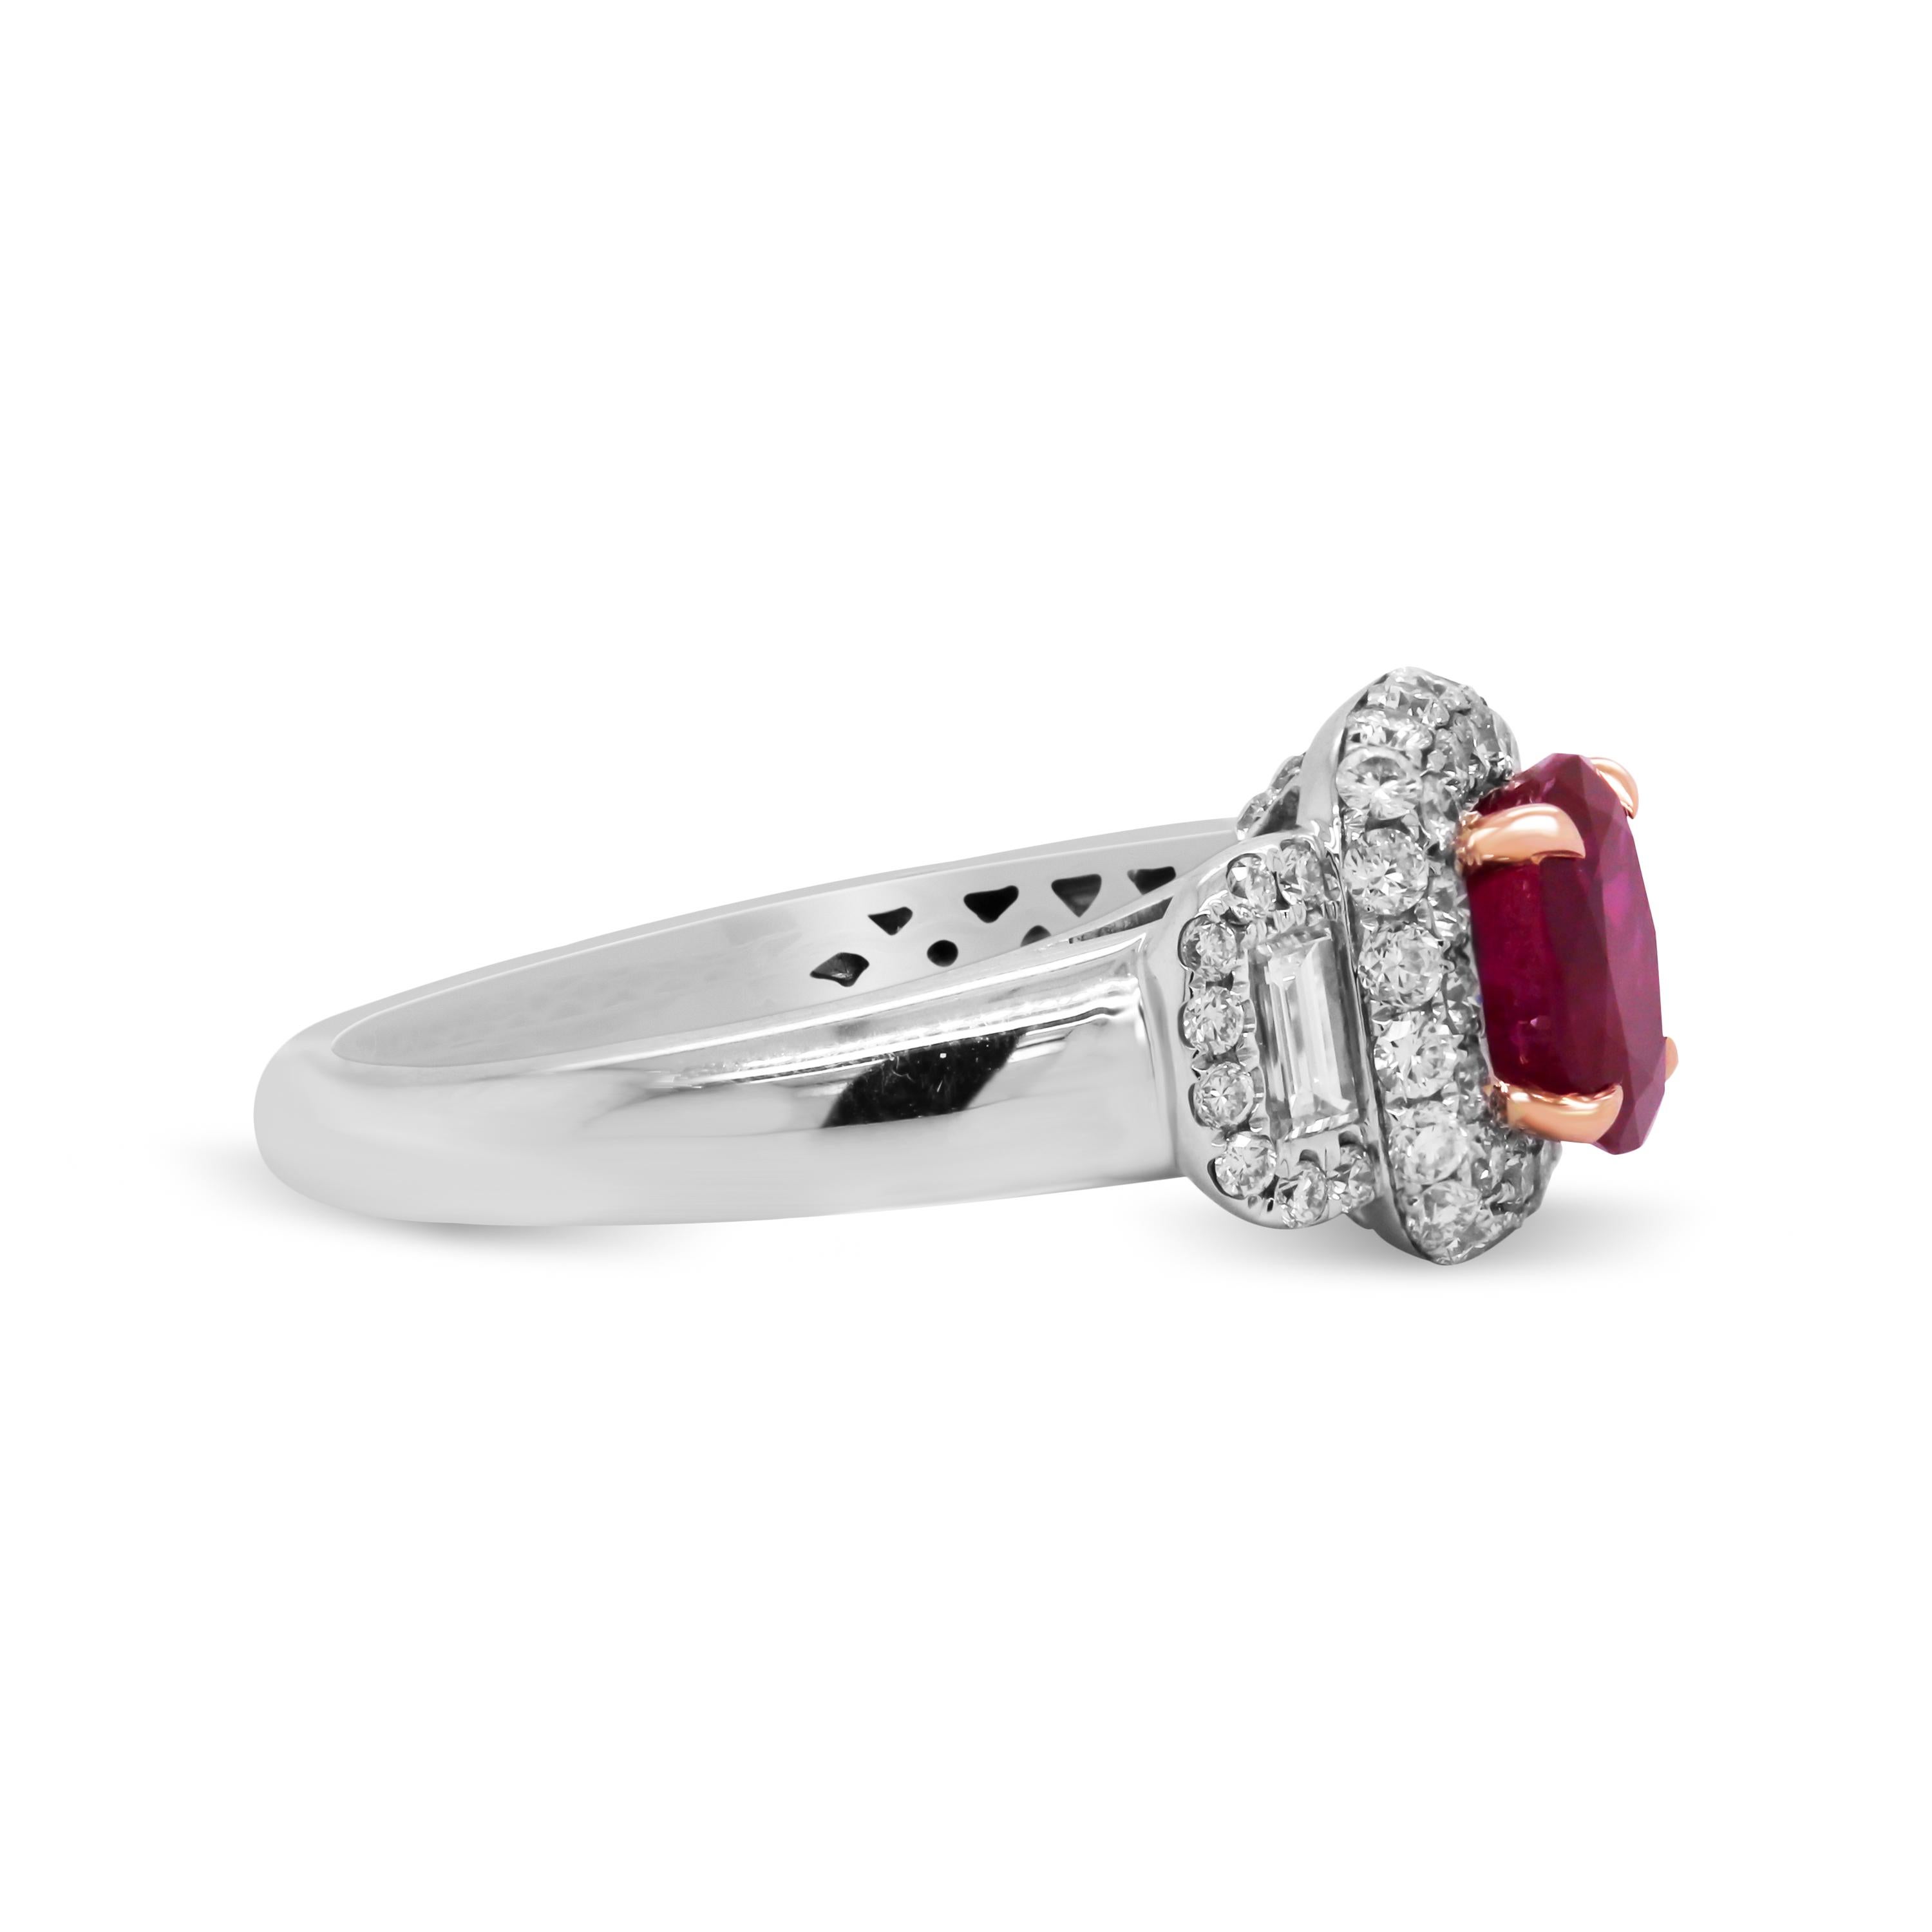 GIA Certified 1.78 Carat No Heat Burma Cushion Cut Ruby Diamond 18K Gold Ring In Excellent Condition For Sale In Boca Raton, FL